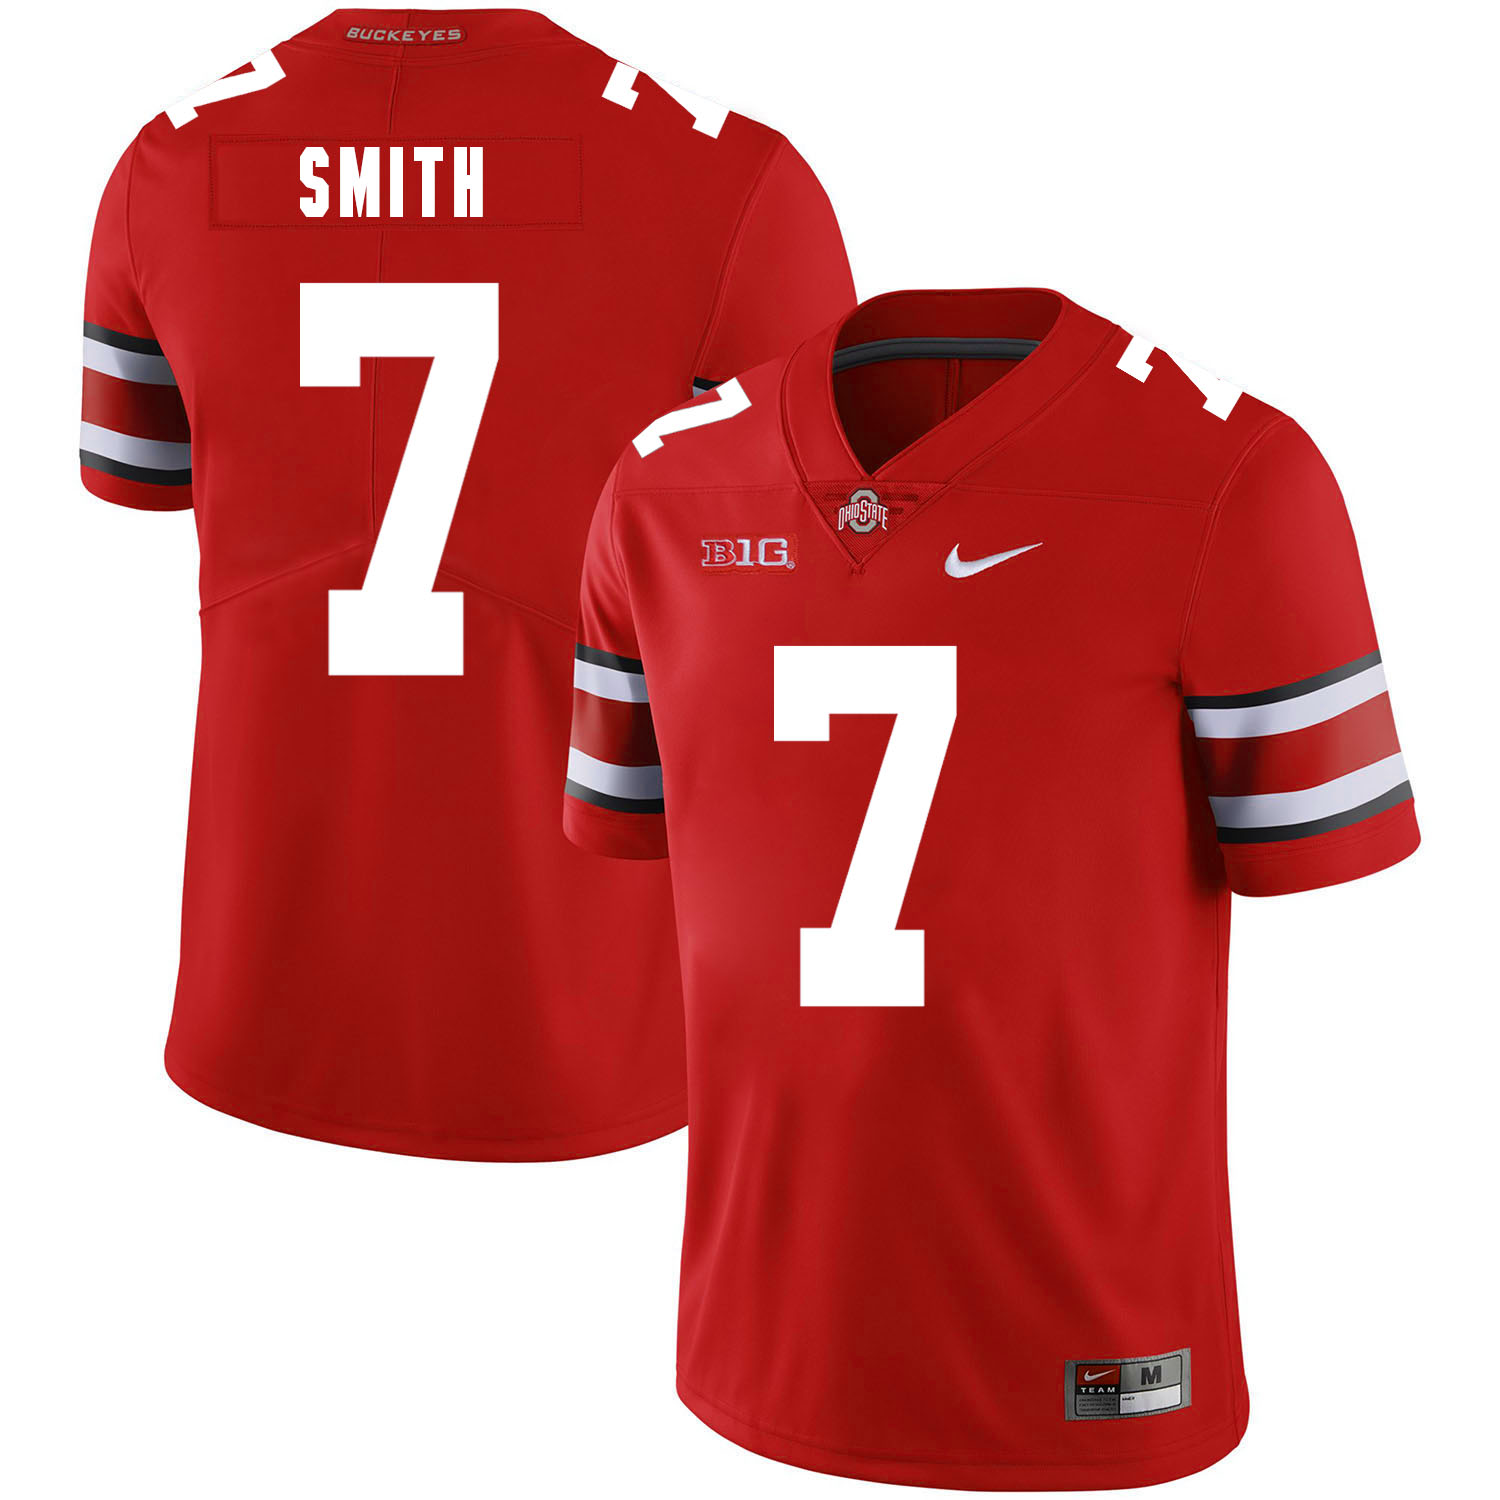 Ohio State Buckeyes 7 Rod Smith Red Nike College Football Jersey